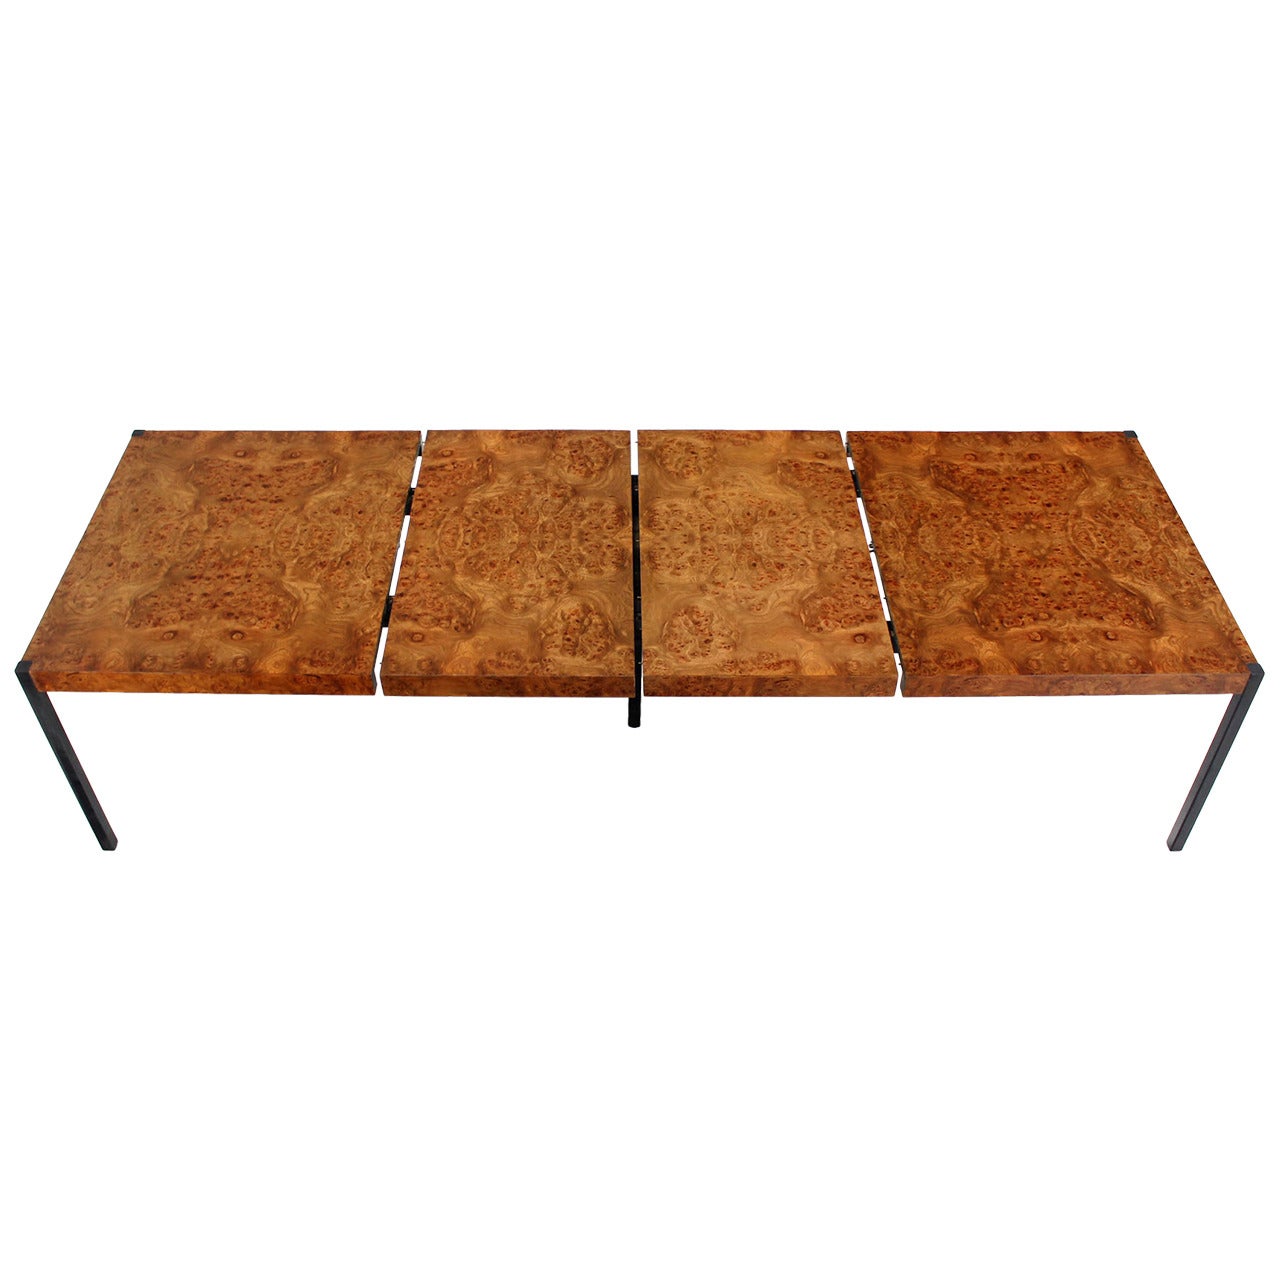 Burl Wood Dining Table with Two Extension Boards by Baughman